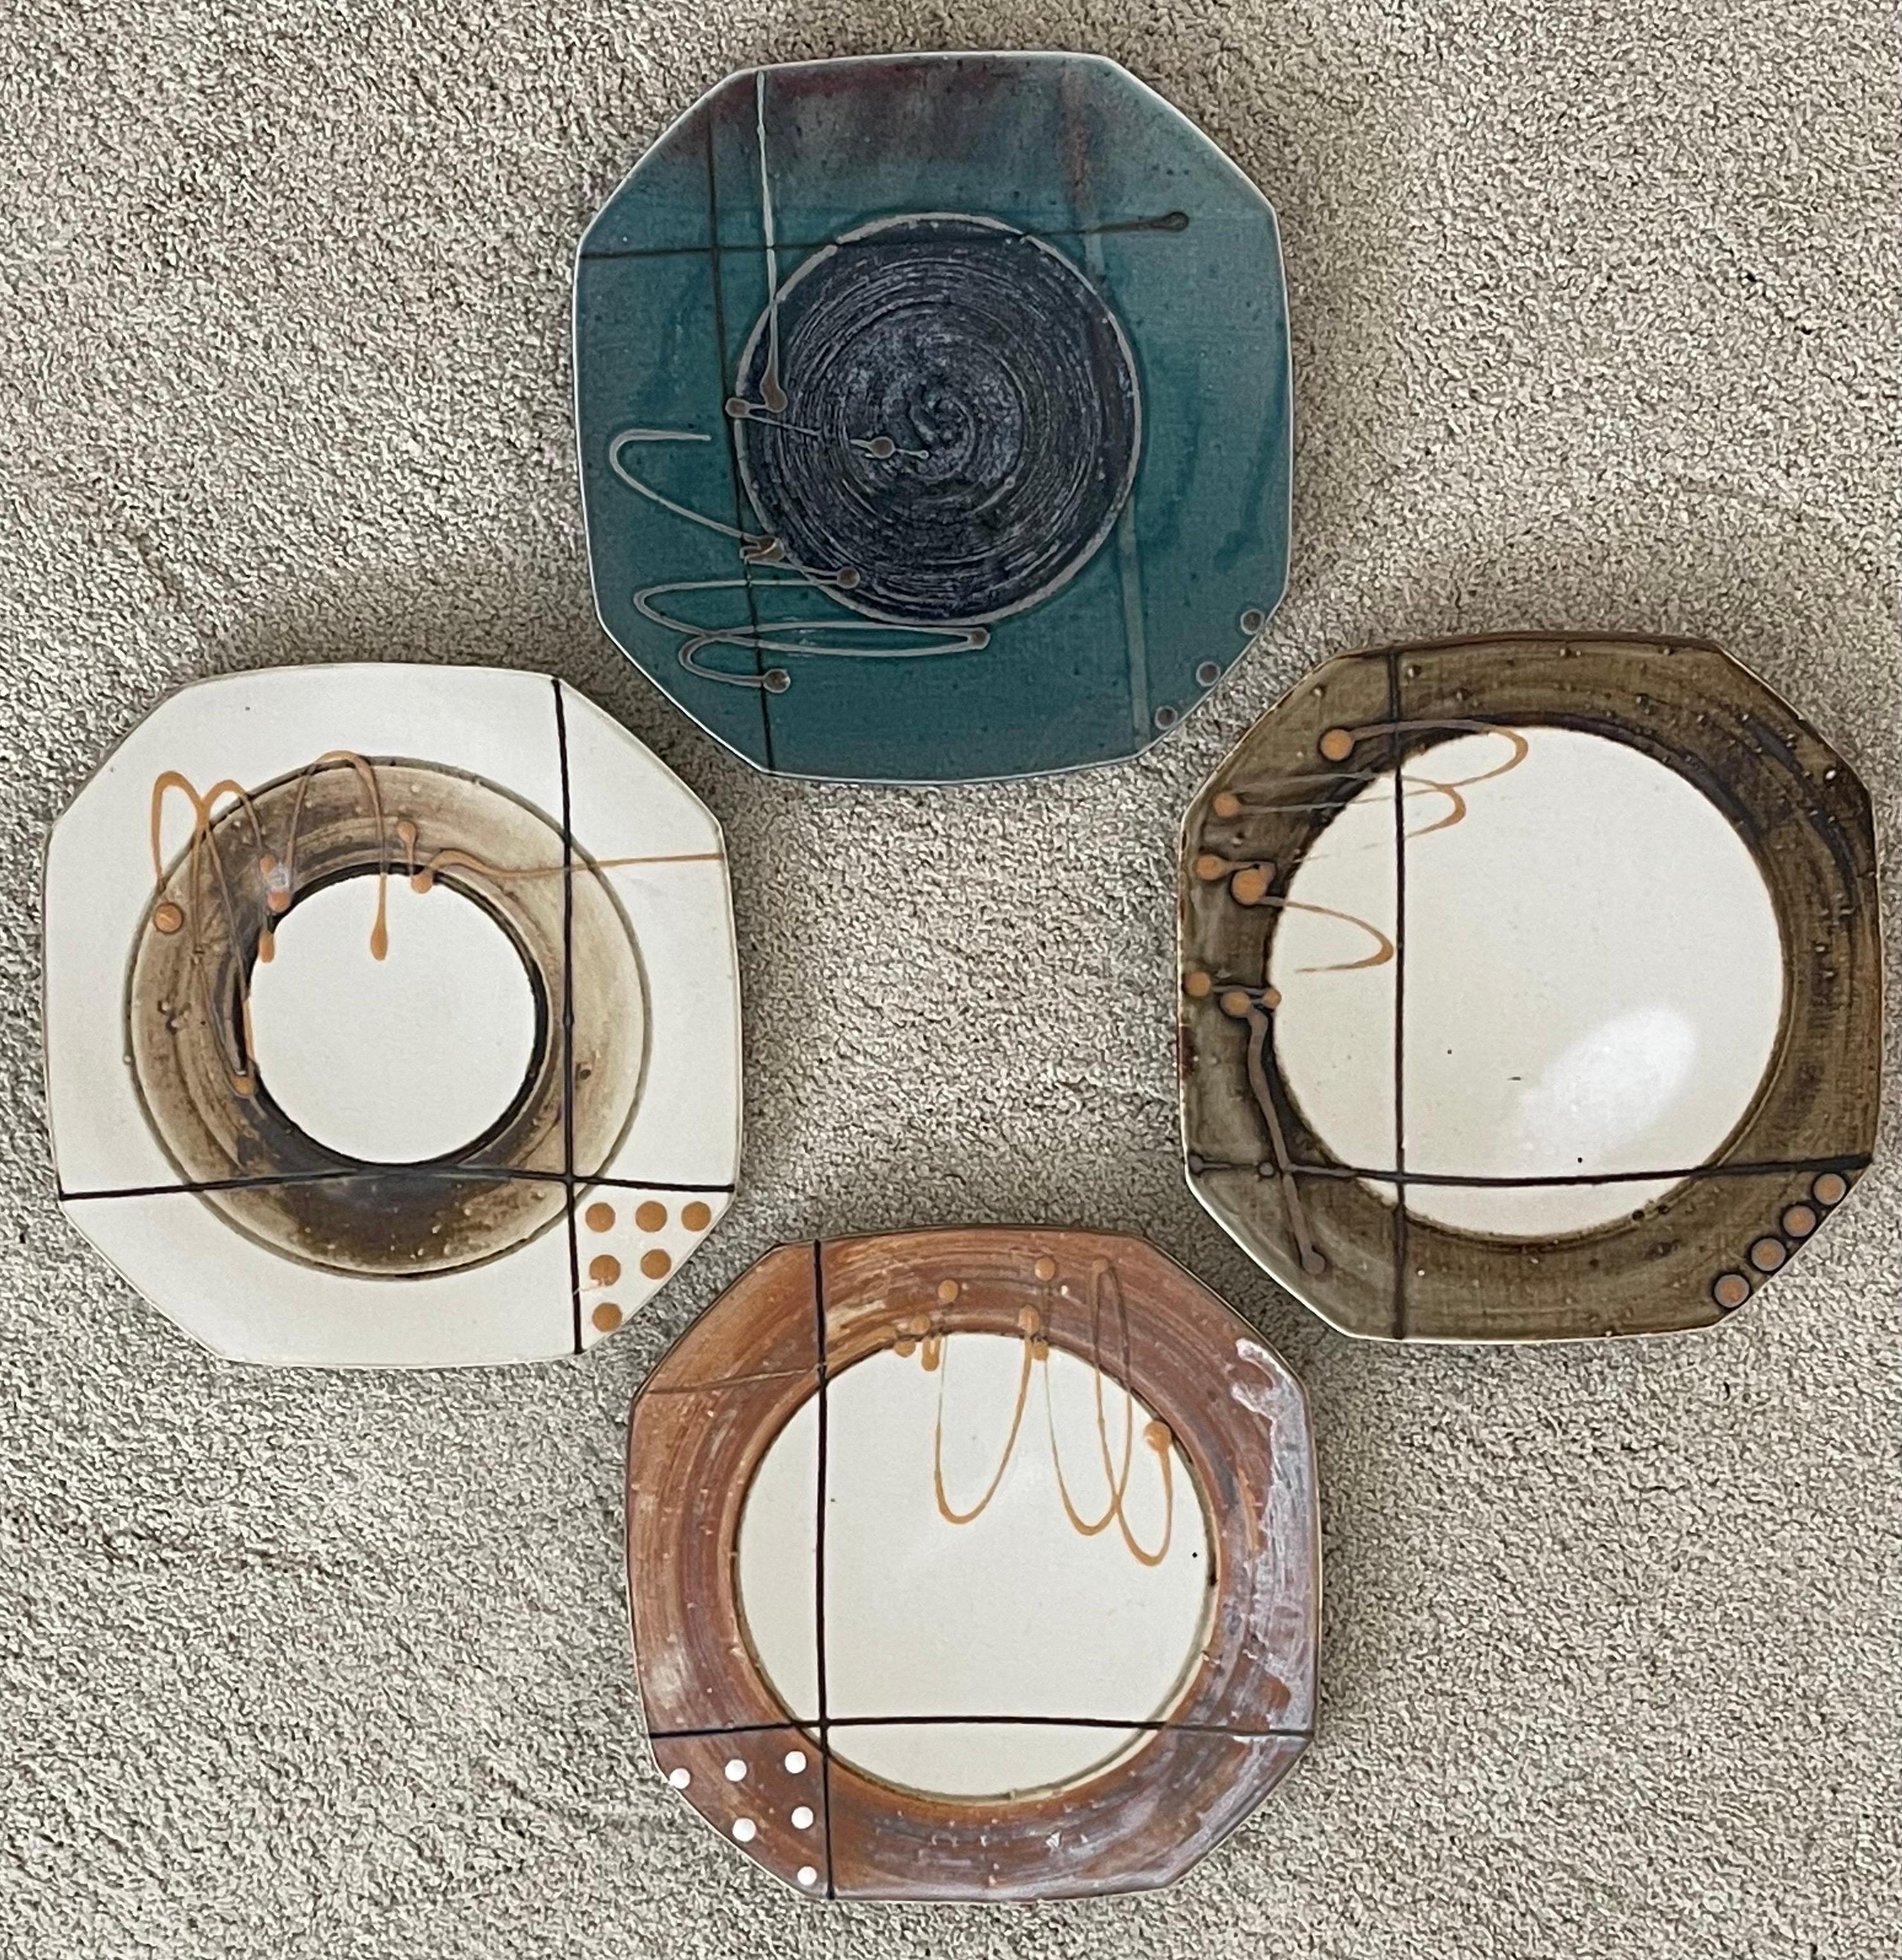 A very cool set of four post-modern stoneware plates by Marshall, circa early 1980s. This plates are in very good vintage condition with no chips or cracks and each plate measures 10.25